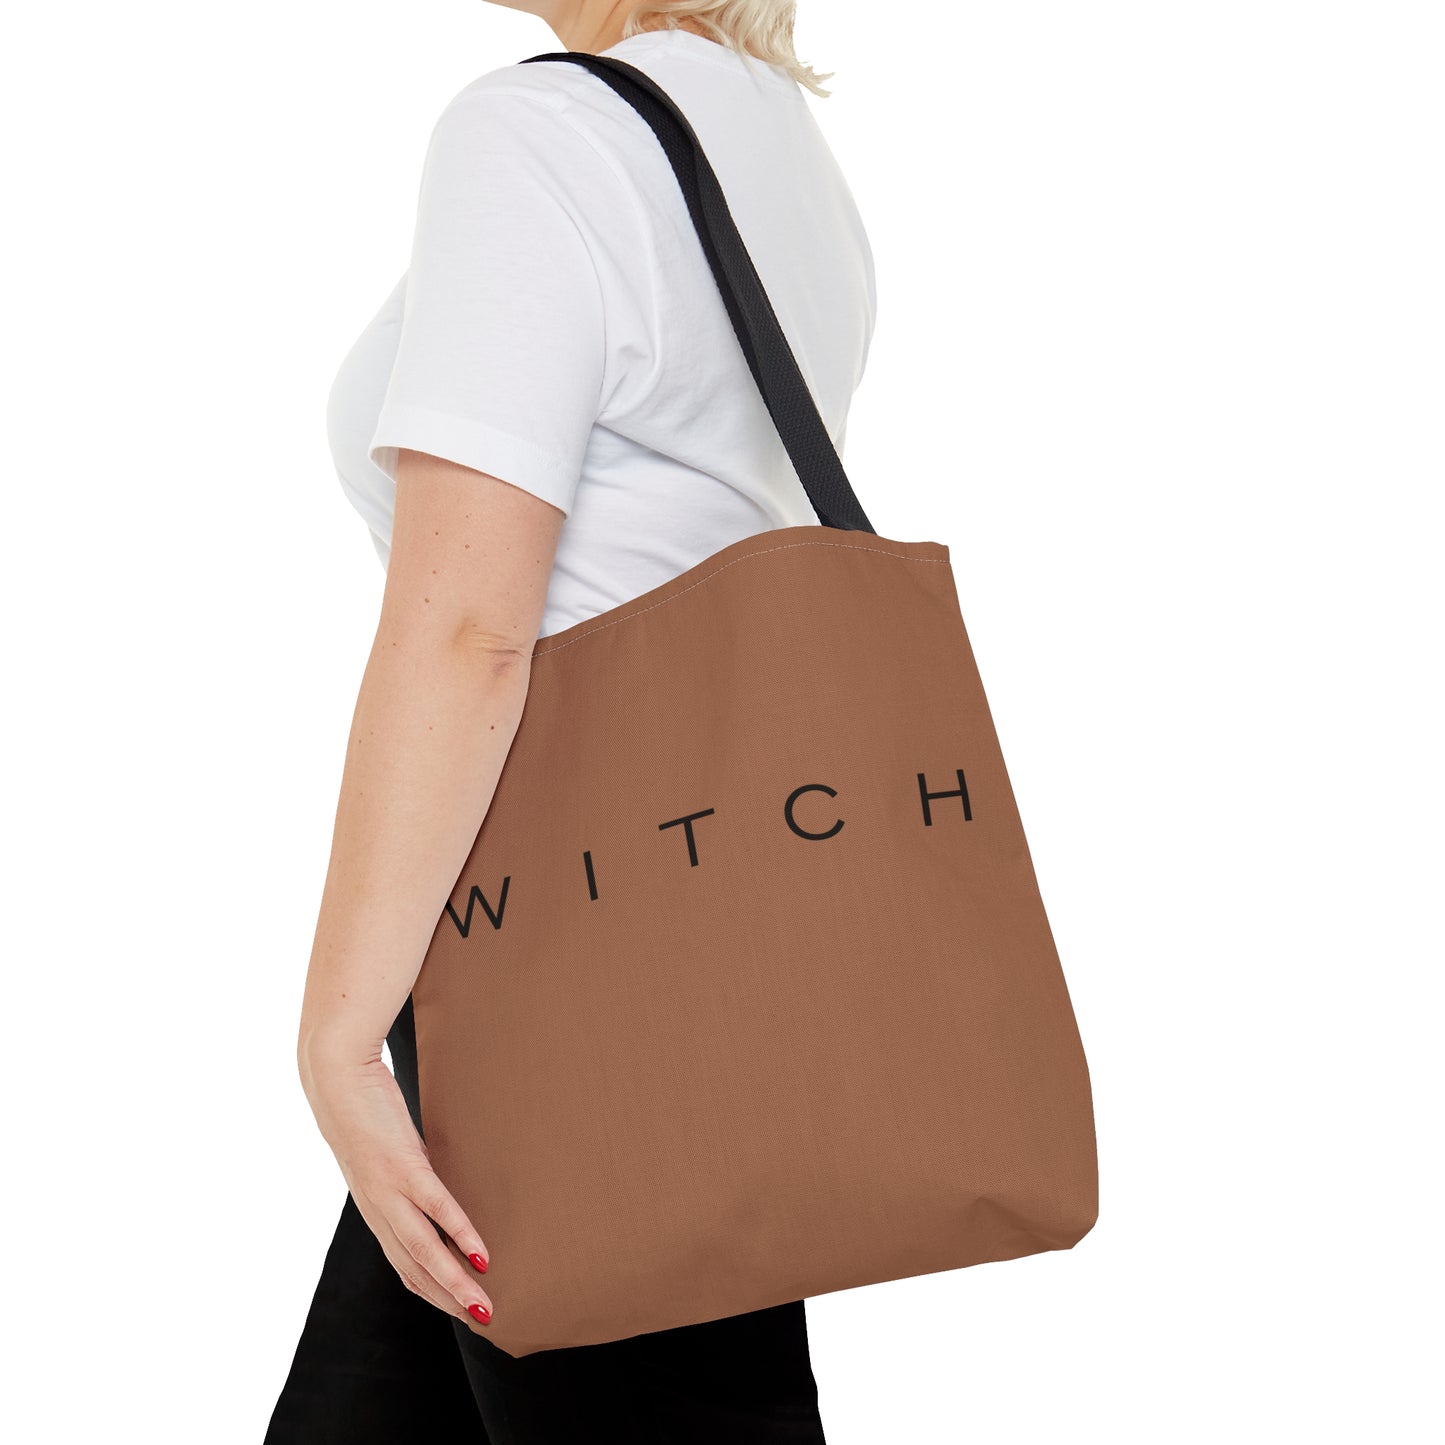 Brown WITCH tote - Grounding